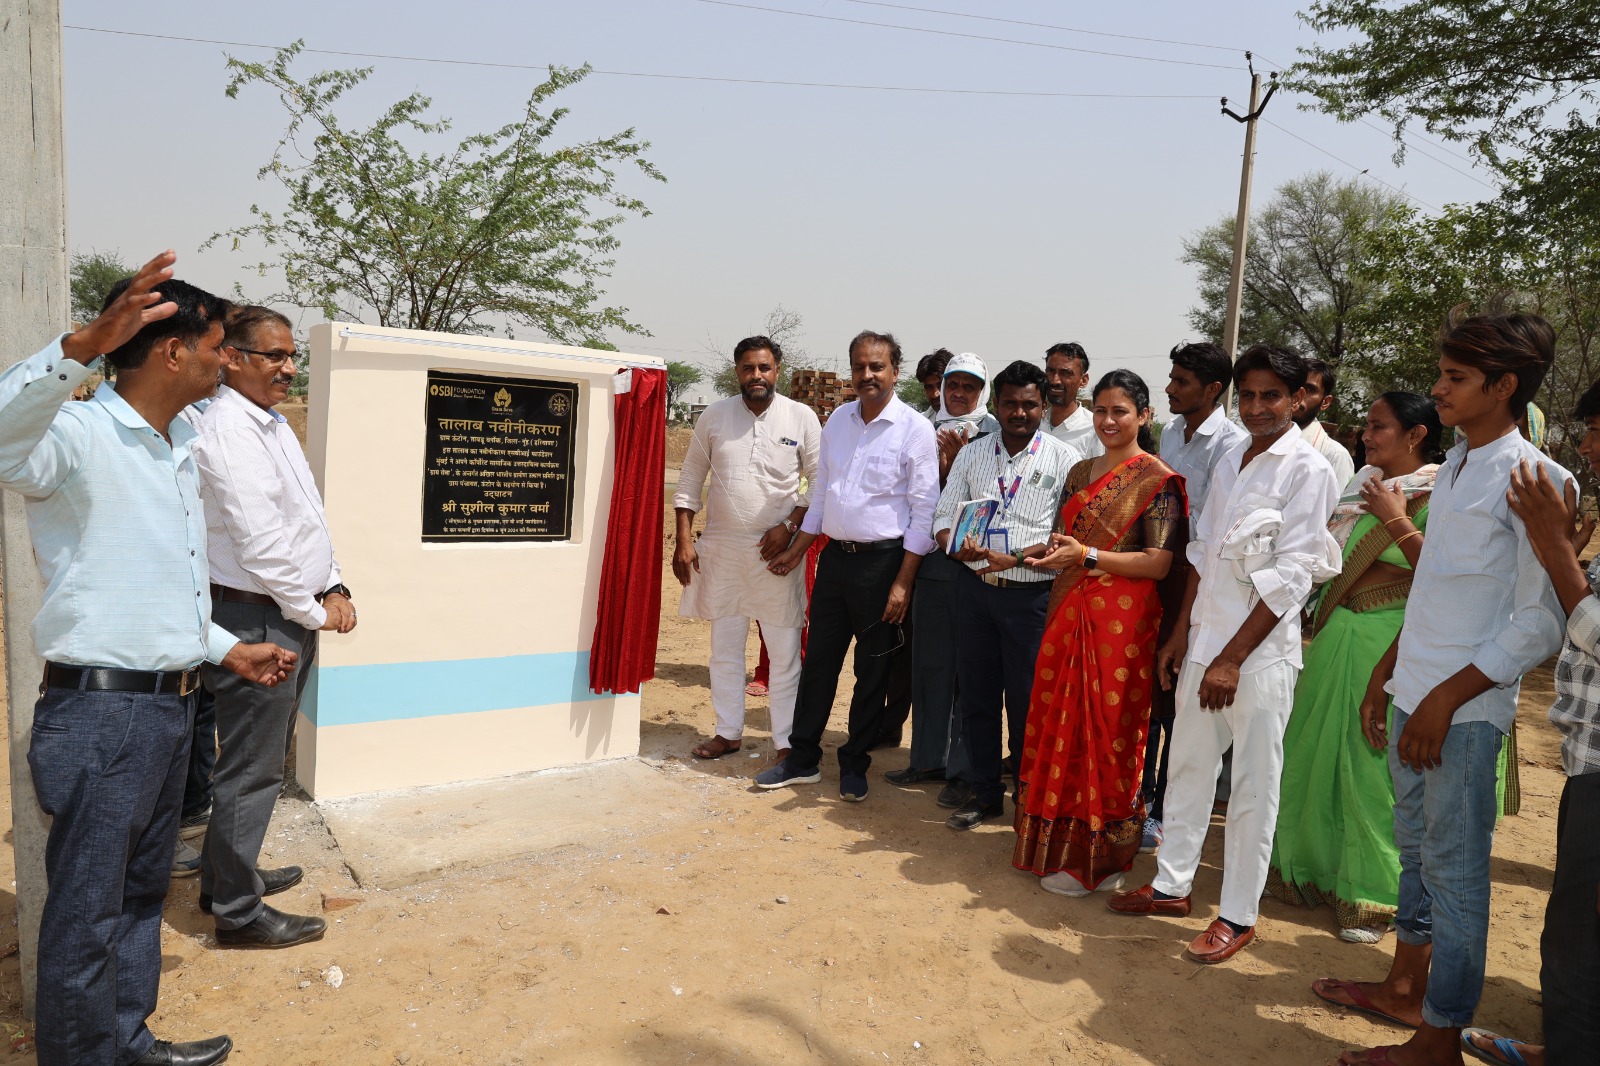 SBI Foundation’s CFO & Chief Administrator Inaugurates Community Infrastructures and Facilities in Nuh, Haryana